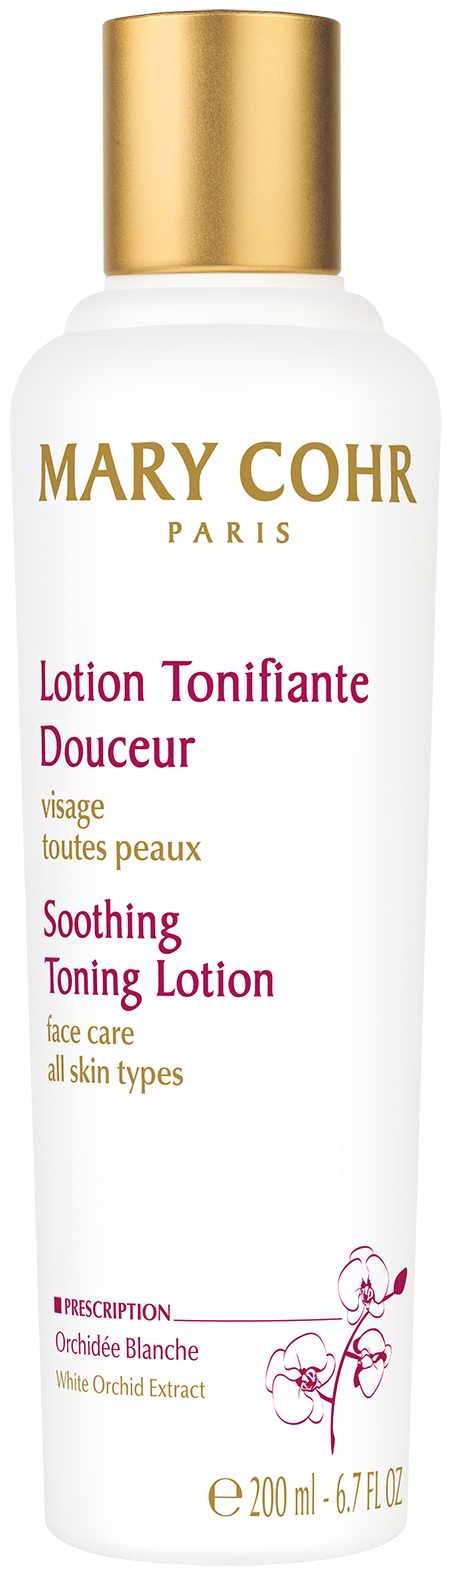 Soothing Toning Lotion with orchidee